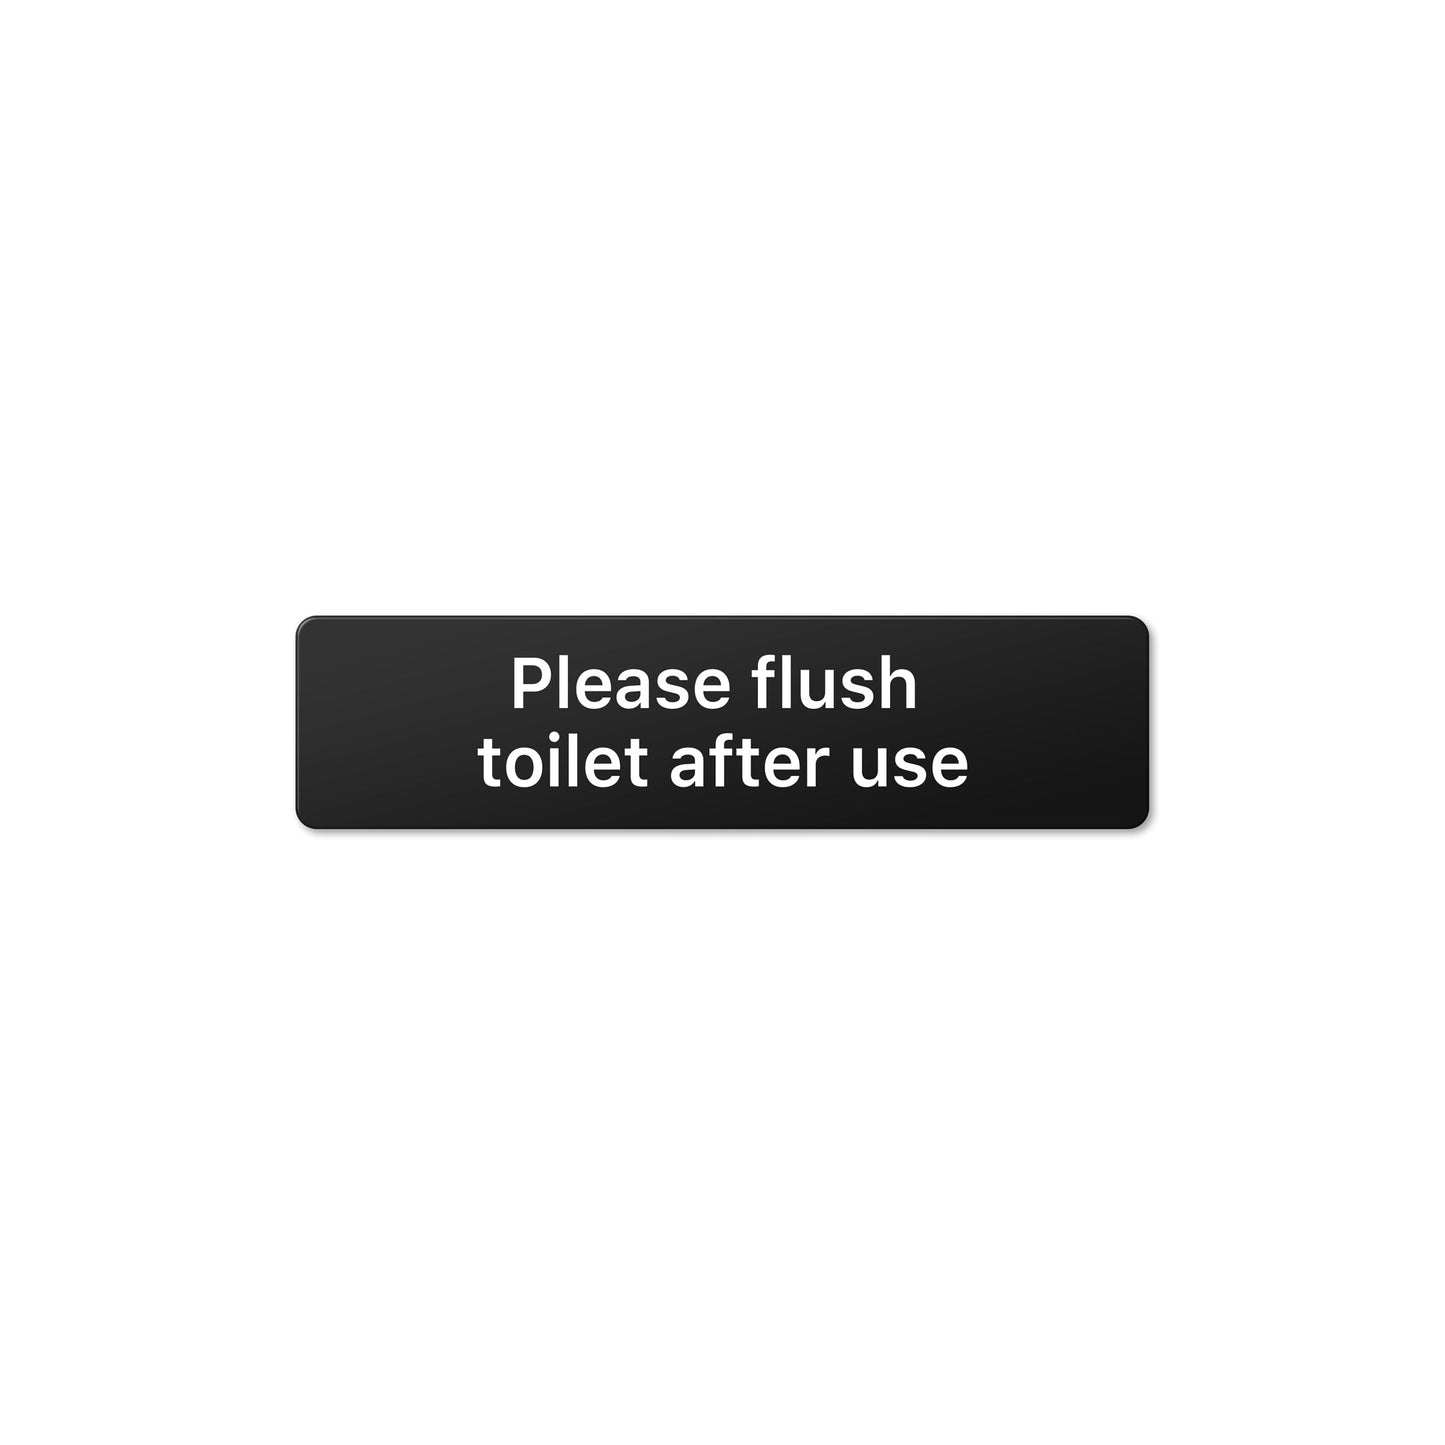 Please flush toilet after use